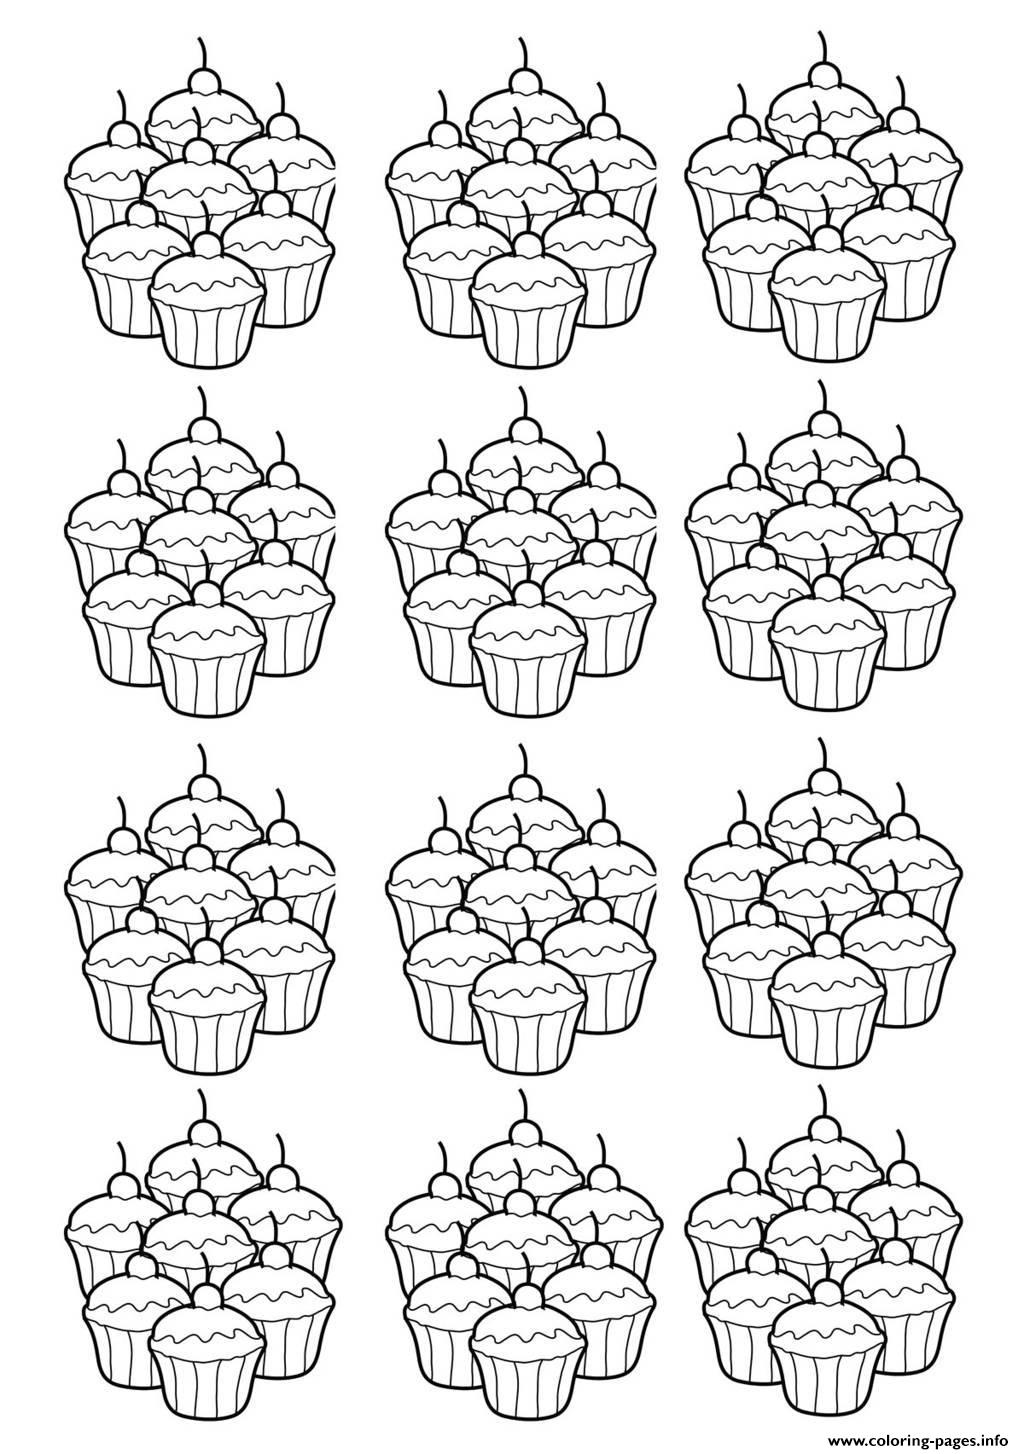 Adult Cupcakes Mosaique coloring